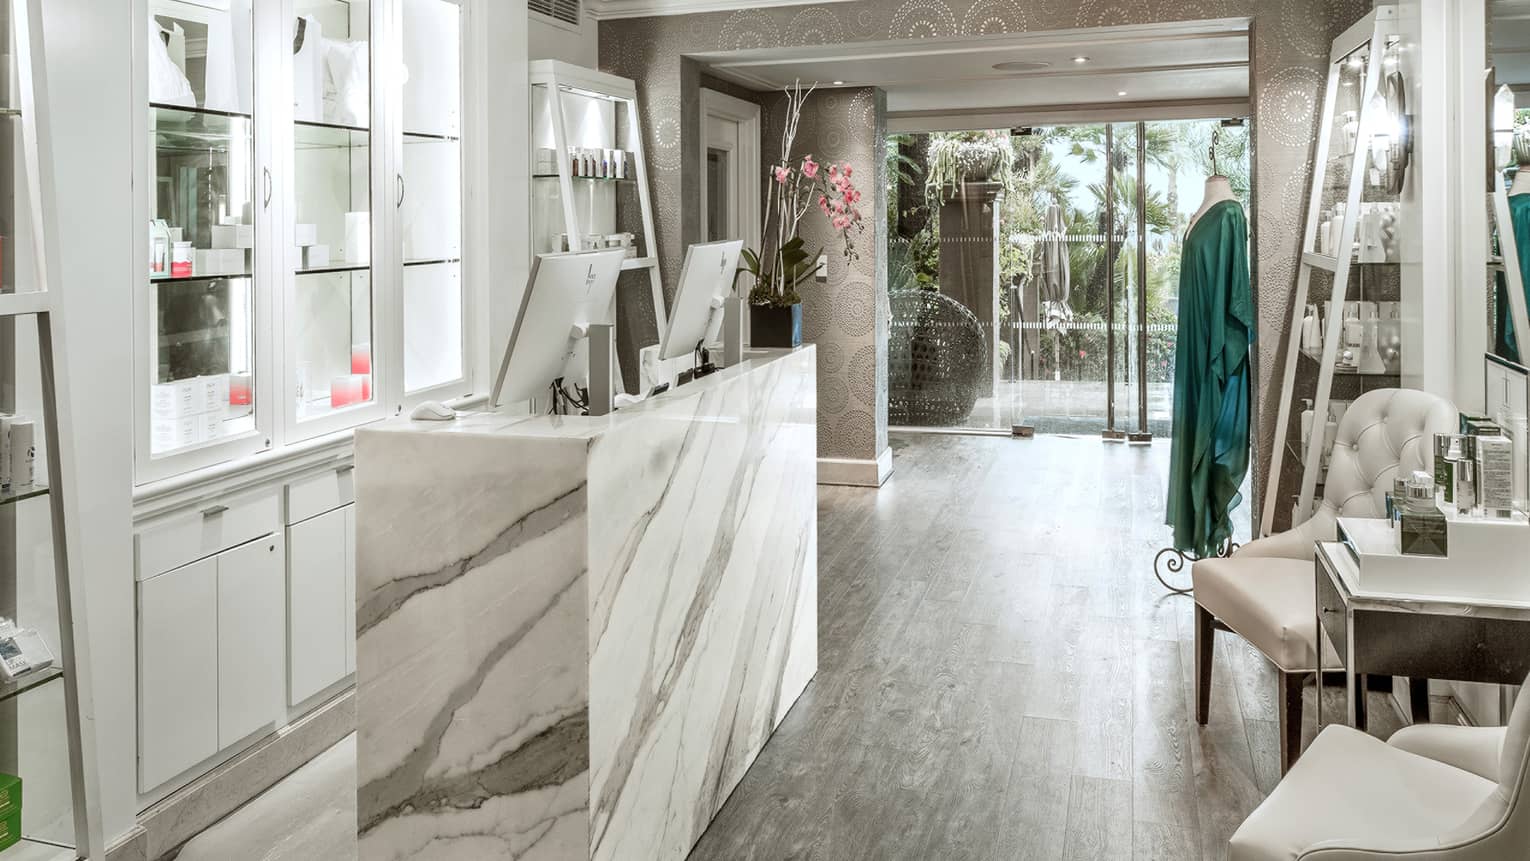 A spa boutique with marble counter, glass cabinets and shelving displaying spa products